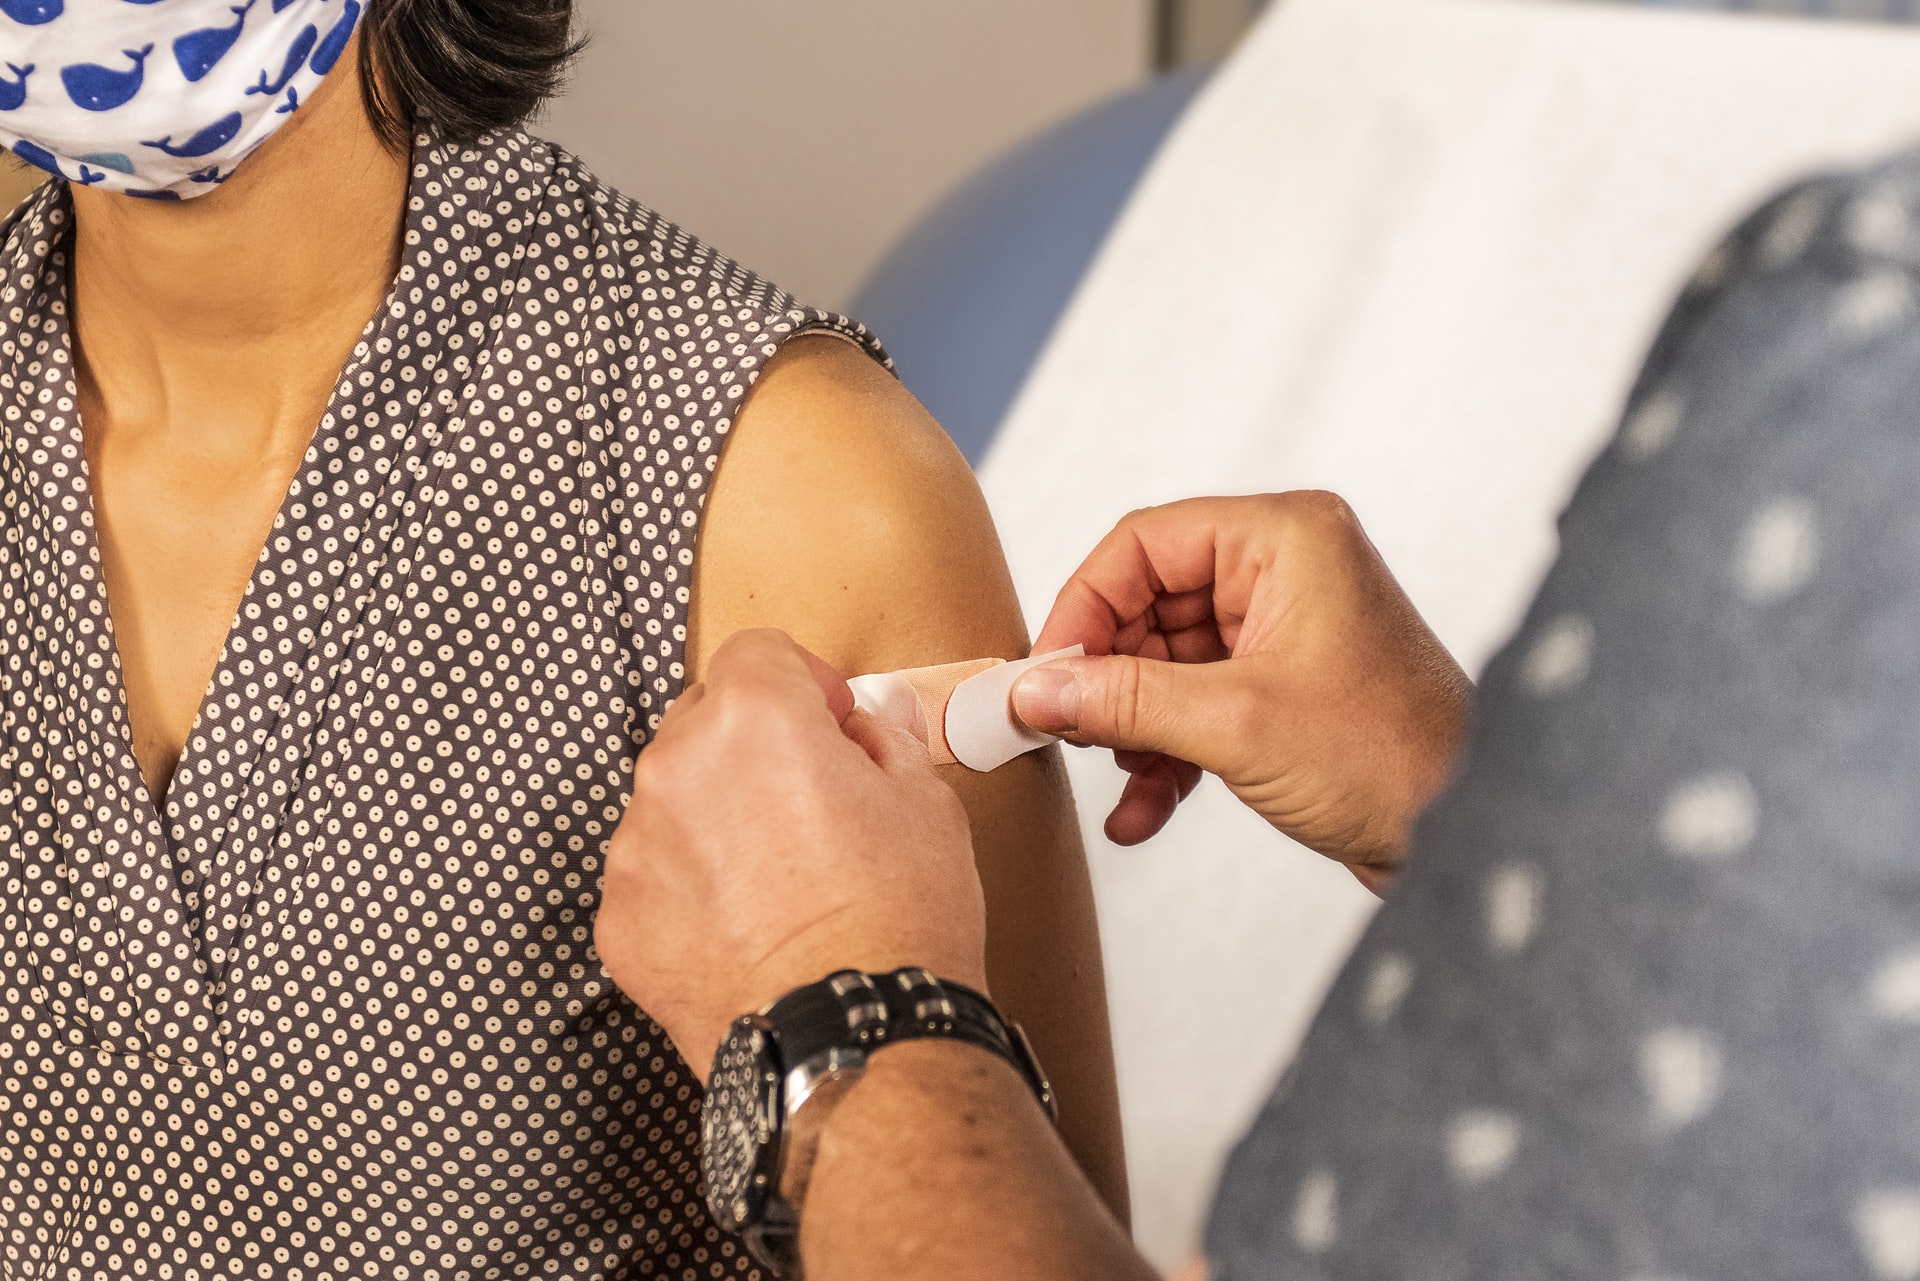 A single HPV vaccine dose can protect against cervical cancer